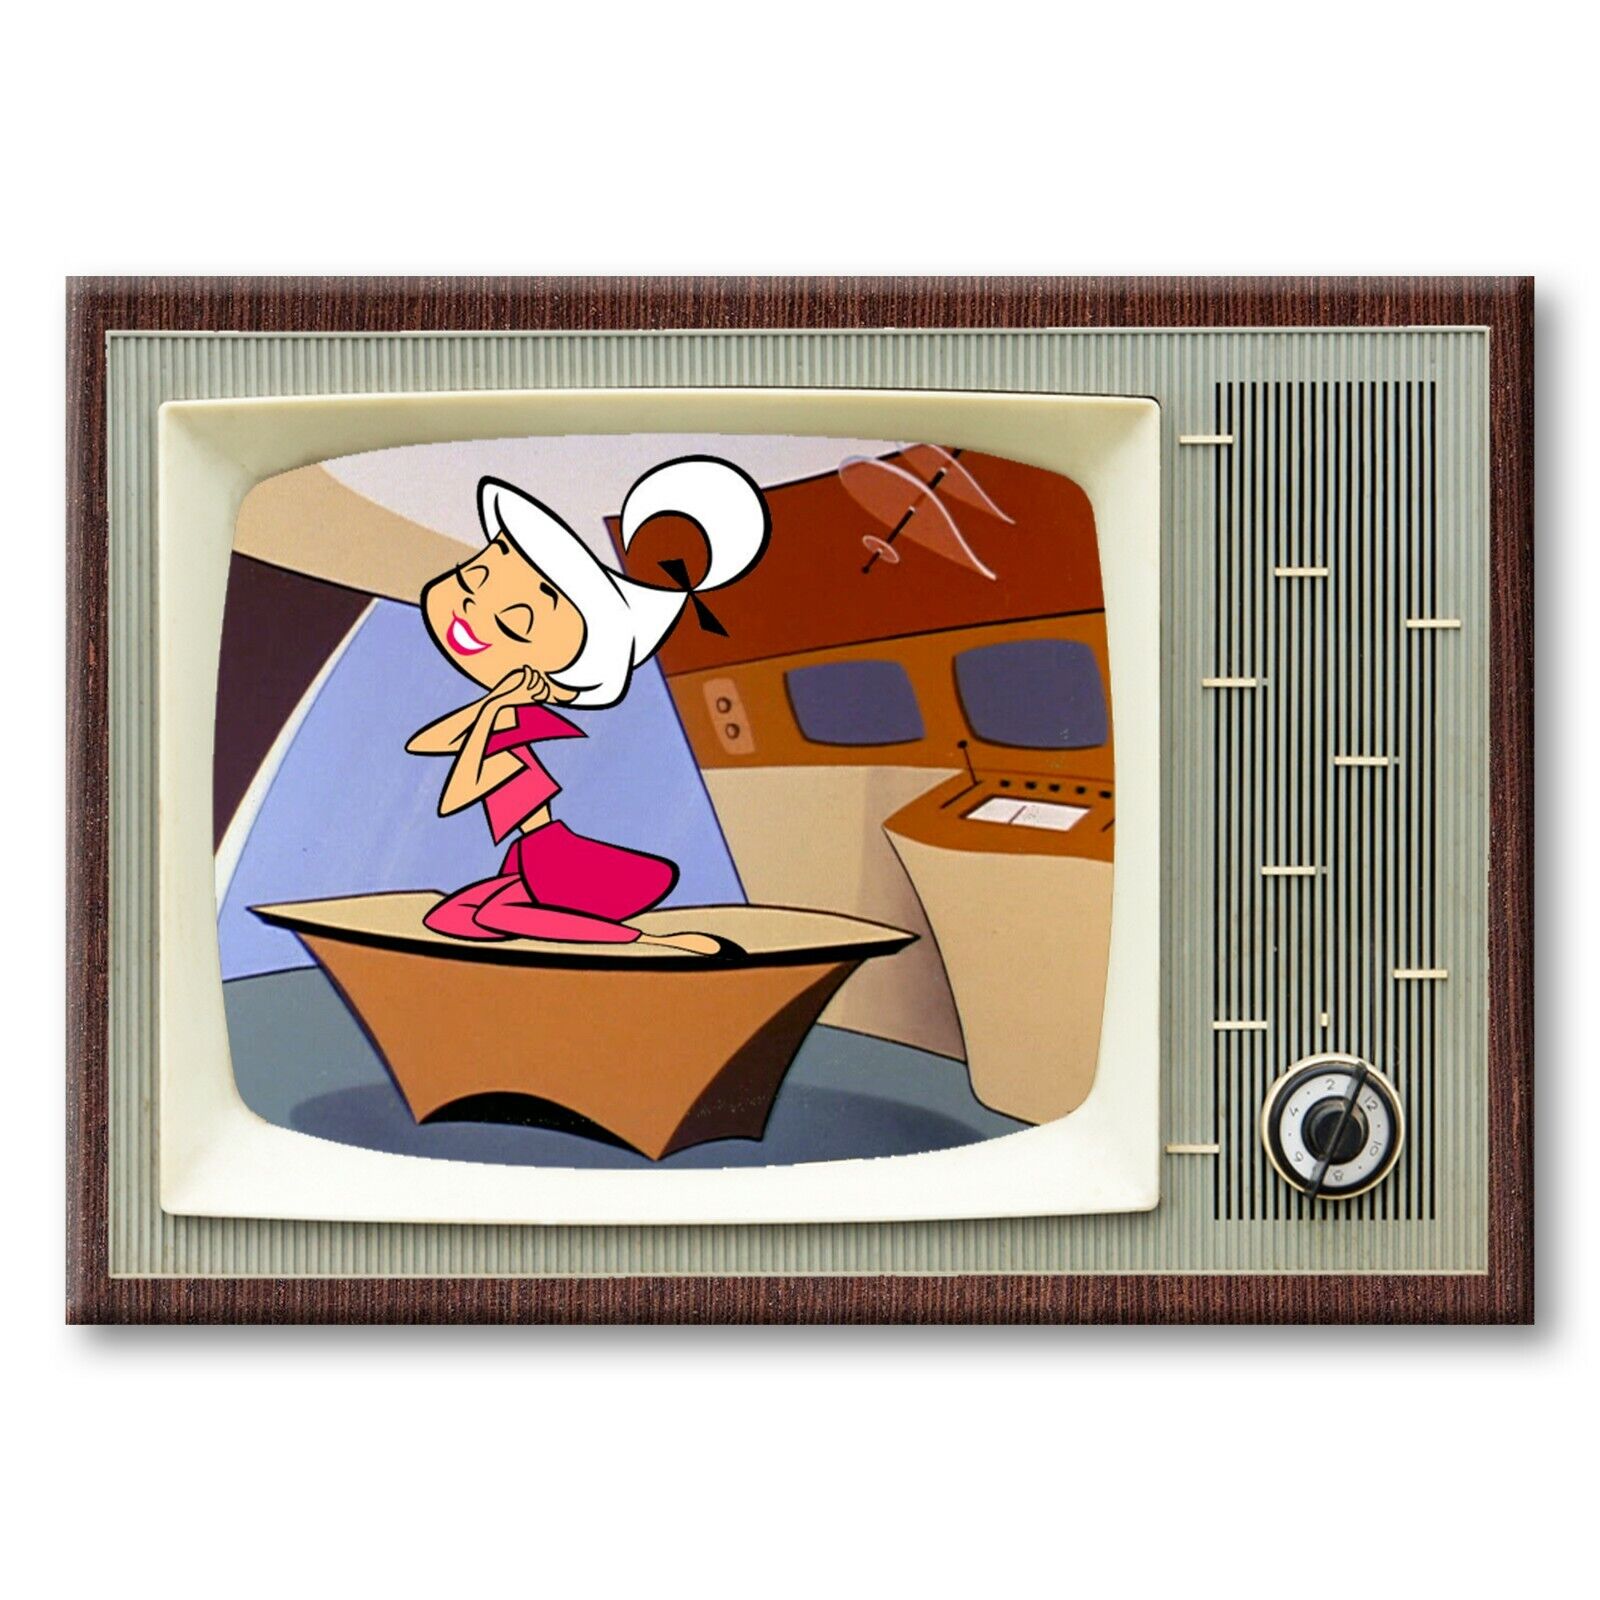 JUDY JETSON Classic TV 3.5 inches x 2.5 inches Steel Cased FRIDGE MAGNET Jetsons